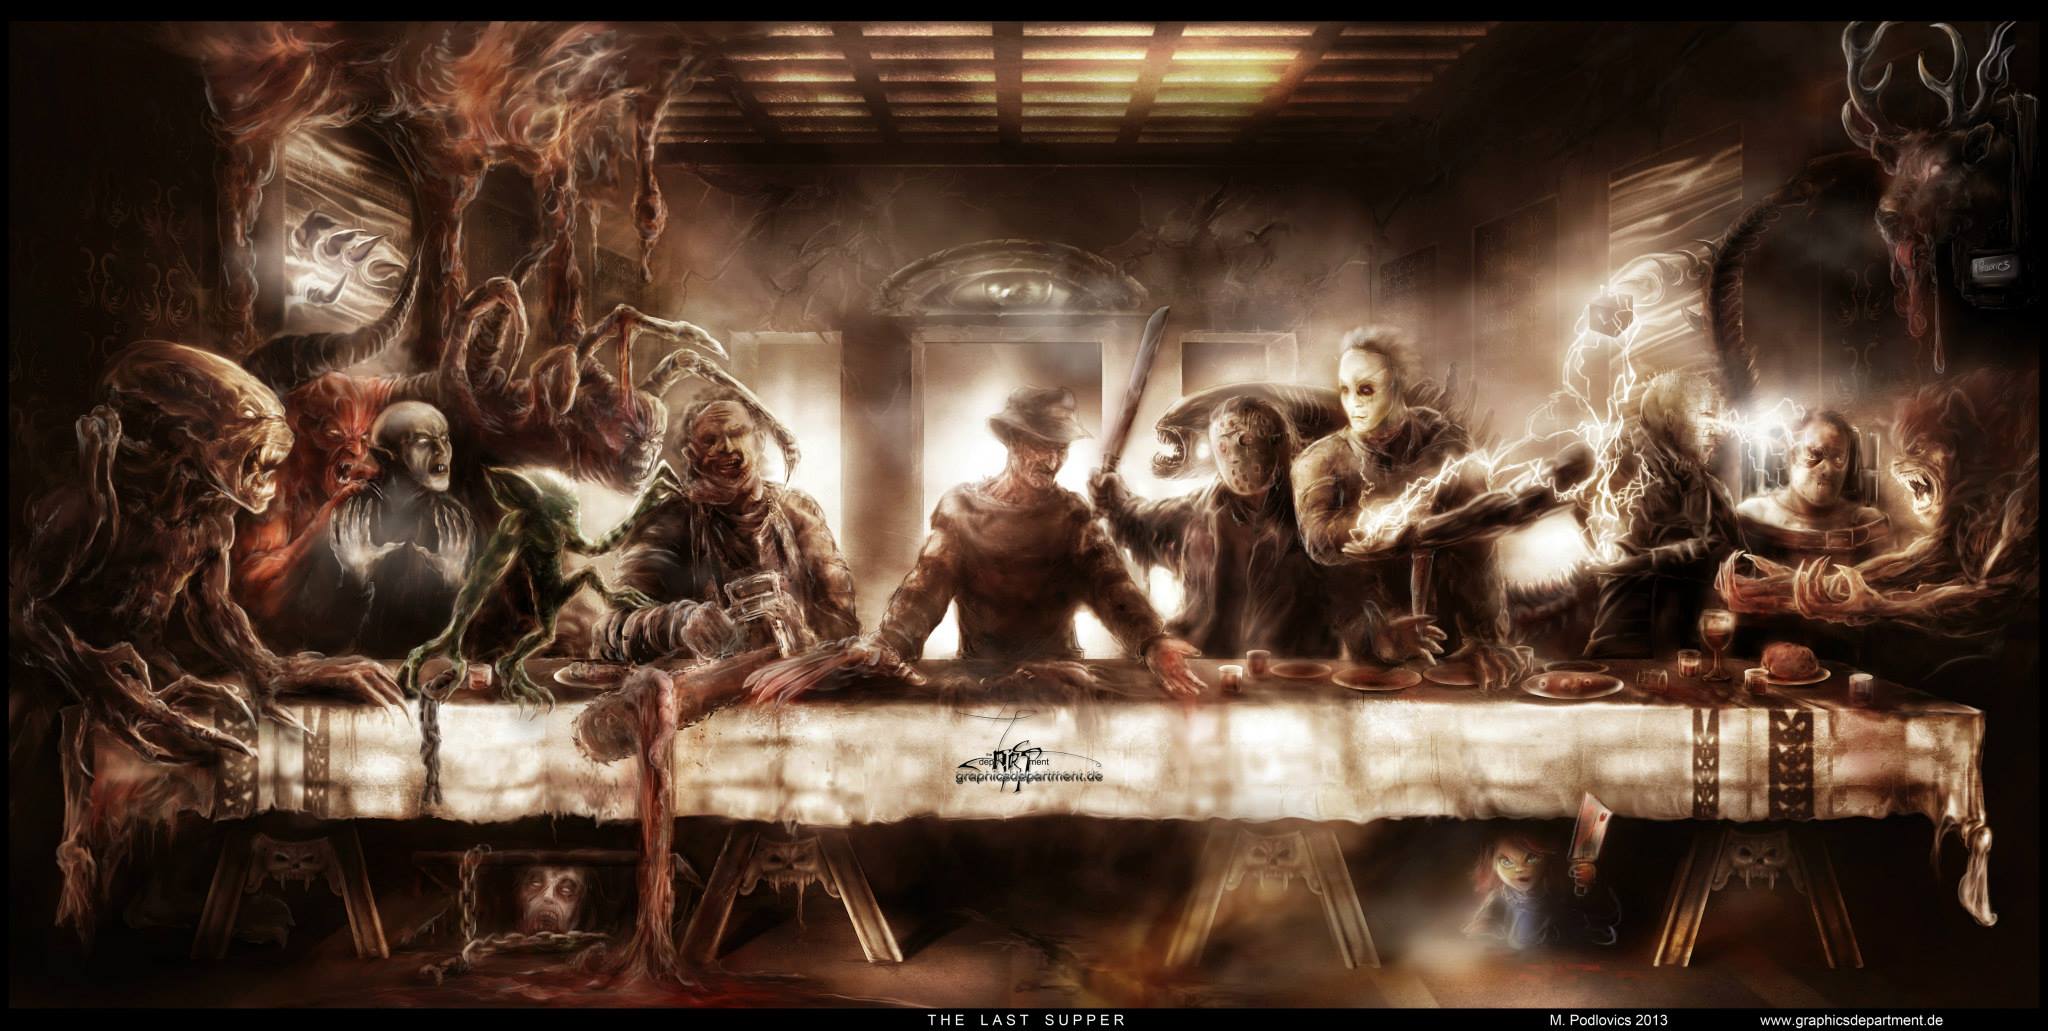 Free download Mind Blowing Horror Icon Last Supper Poster HorrorMoviesca [2048x1031] for your Desktop, Mobile & Tablet. Explore Last Supper Wallpaper. The Lord's Supper Wallpaper, Star Wars Last Supper